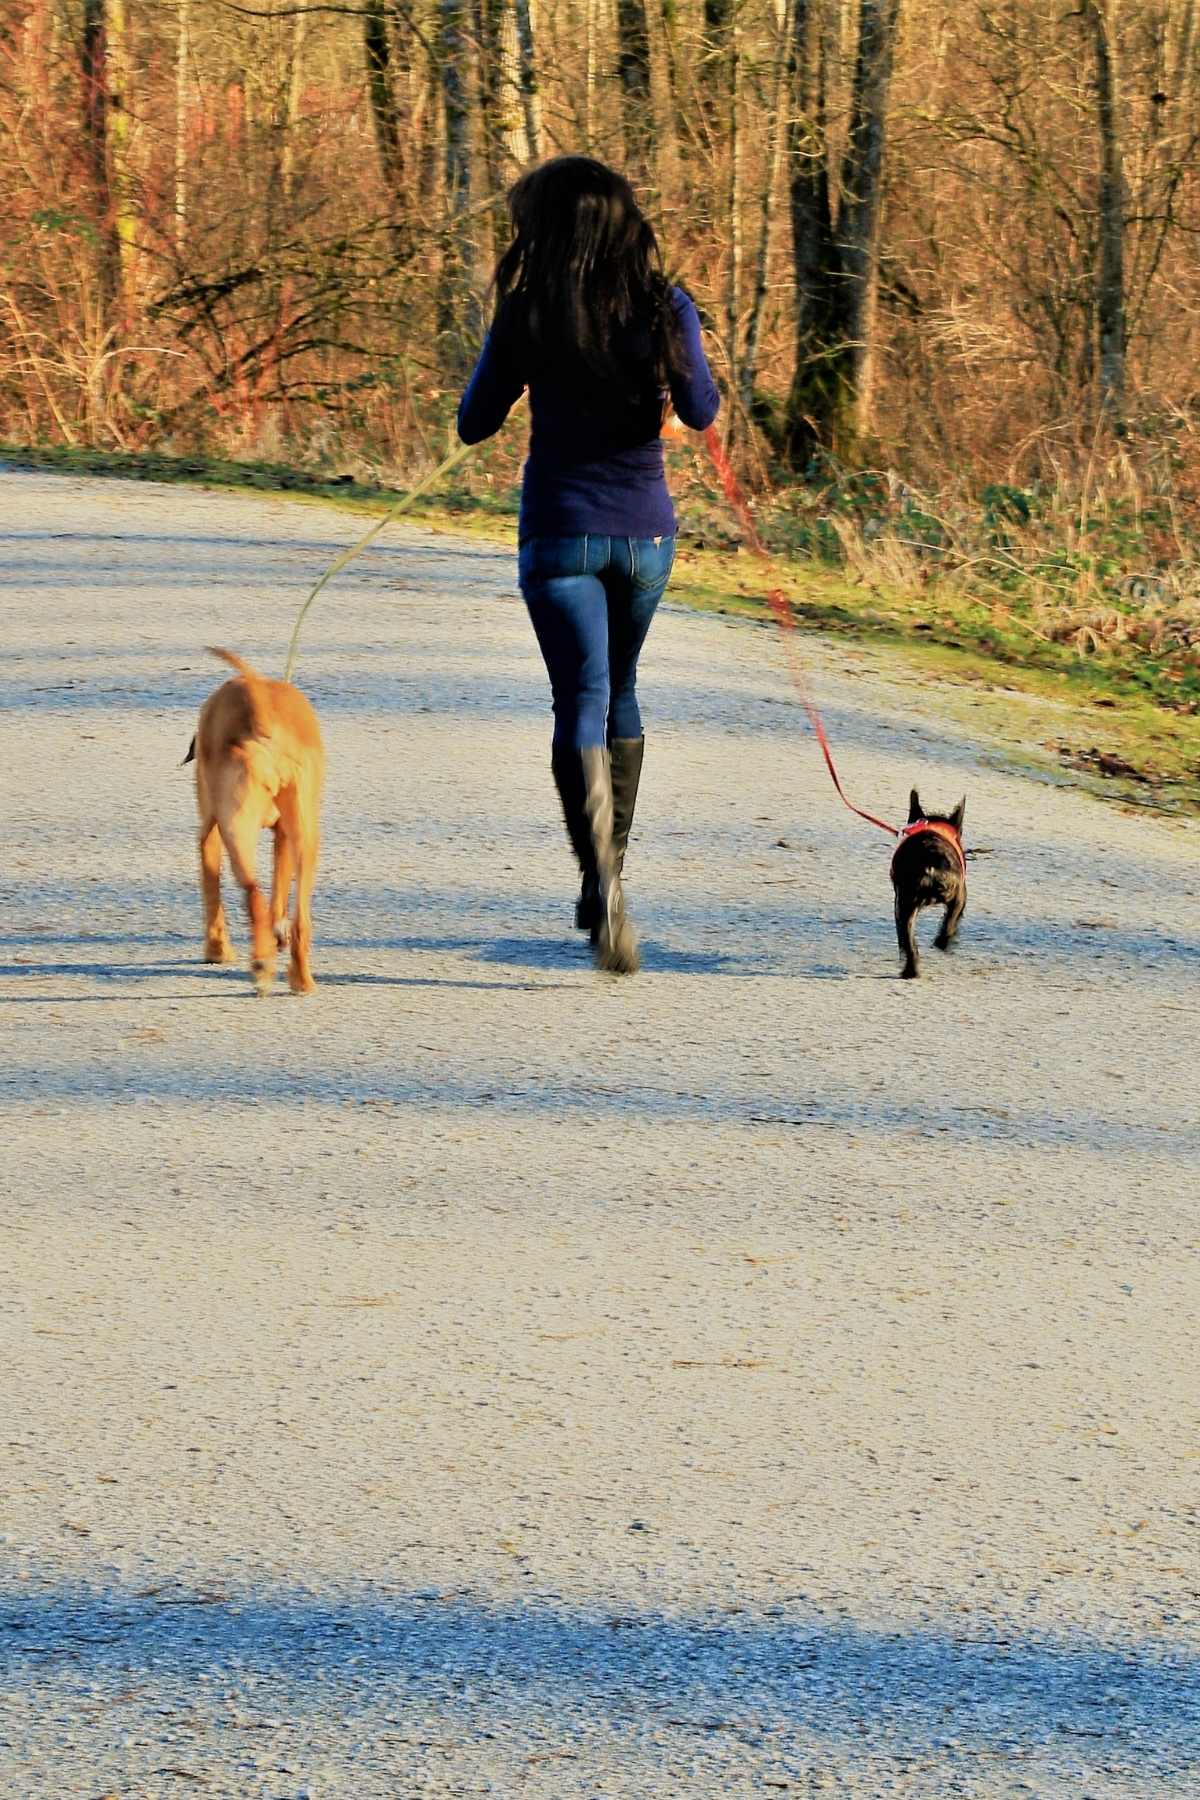 increase your steps by taking dog for a walk